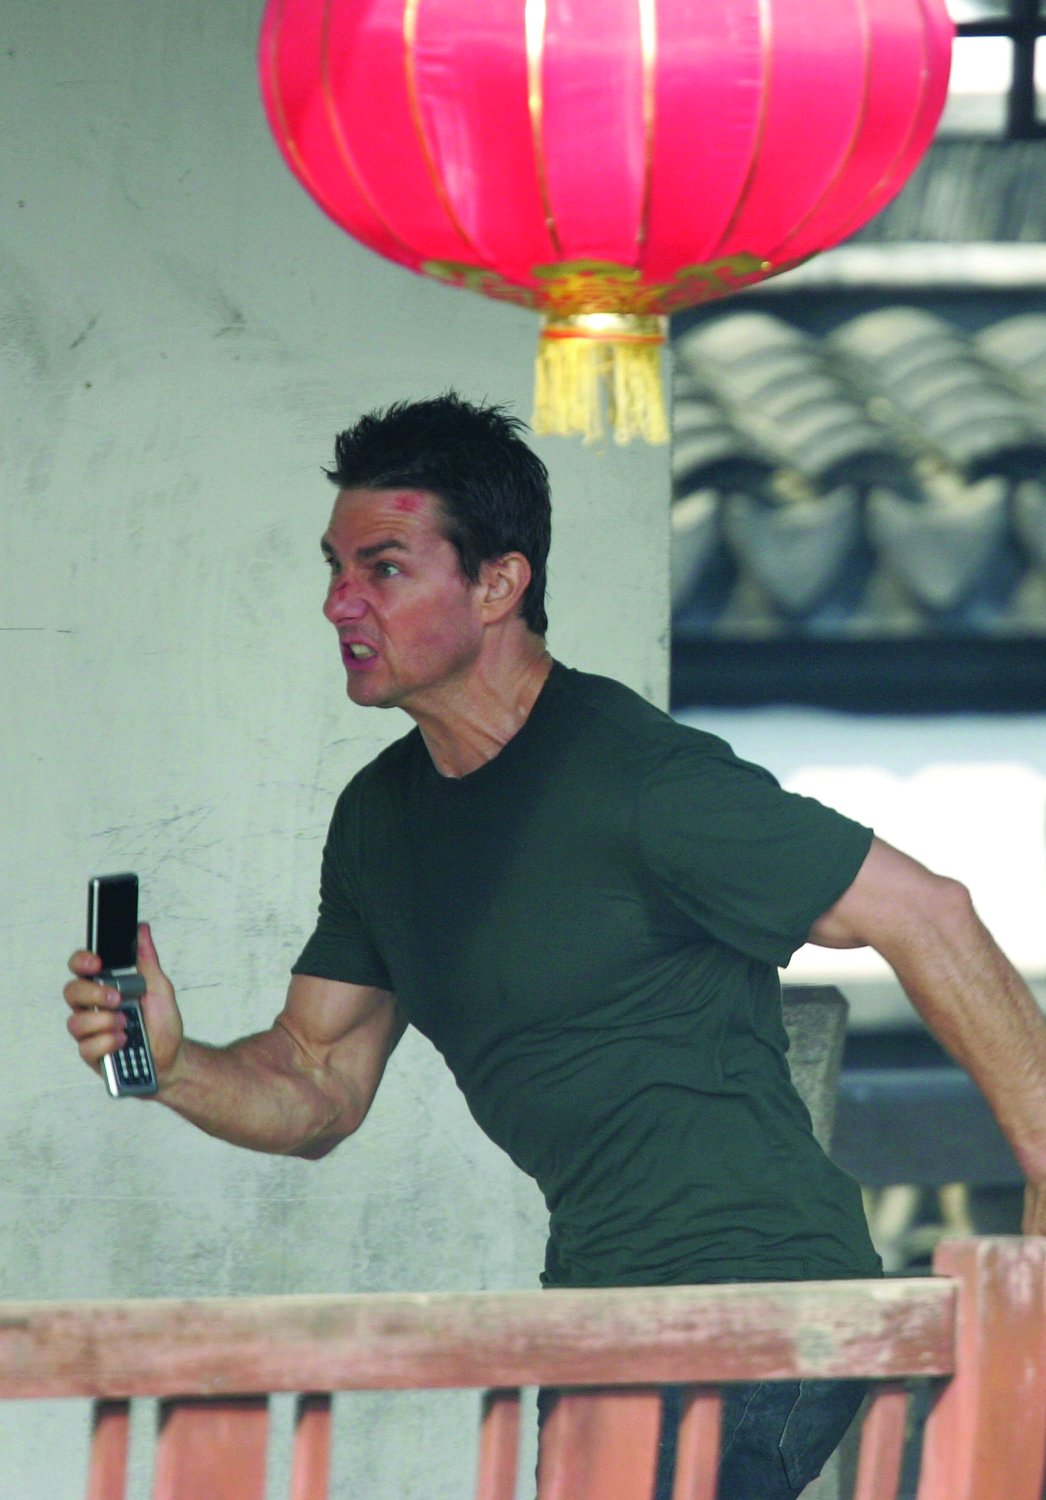 Tom Cruise Films Mission Impossible III In China